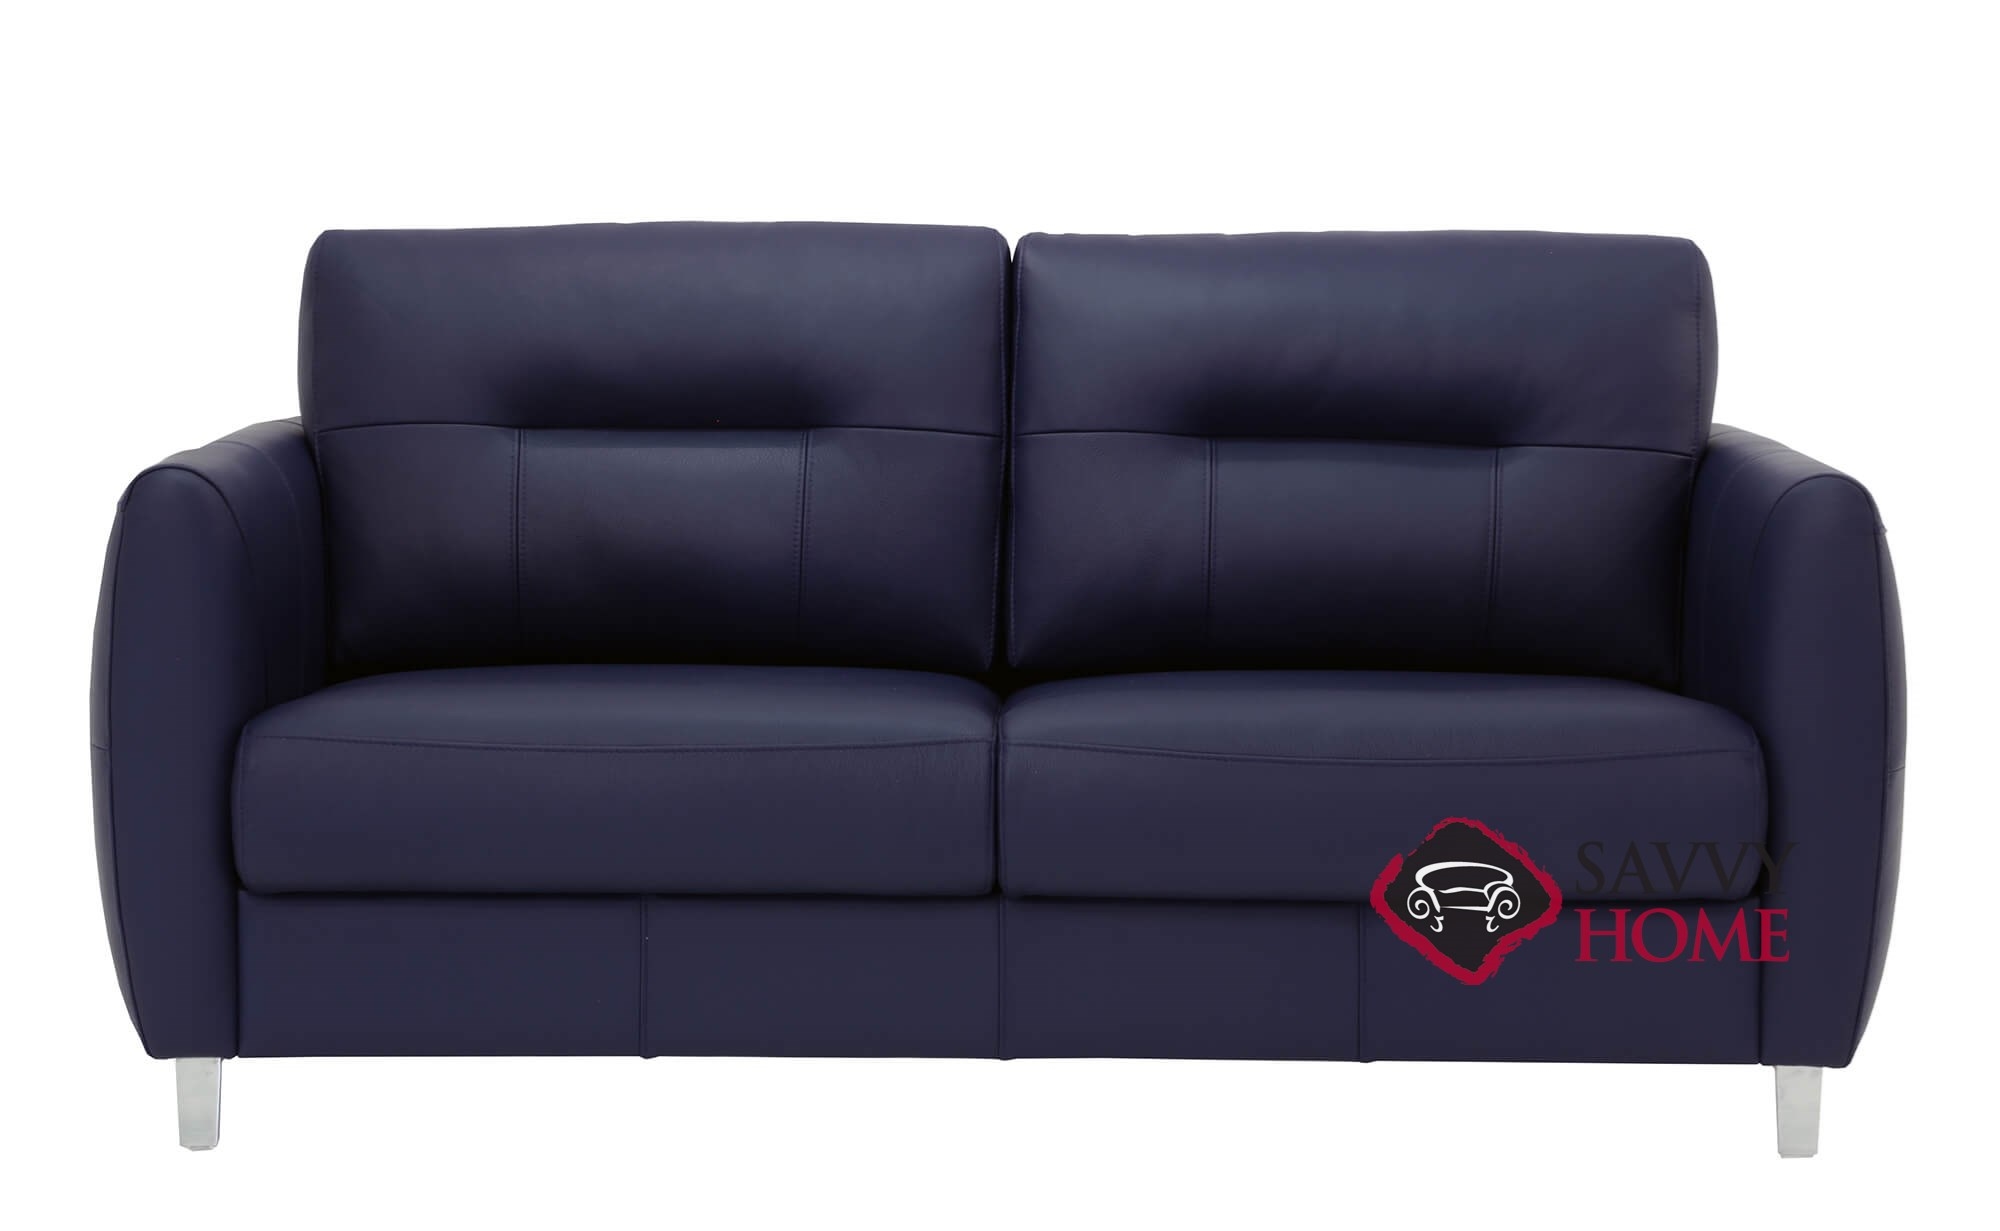 Jamie By Luonto Leather Sleeper Sofas, Full Leather Couch